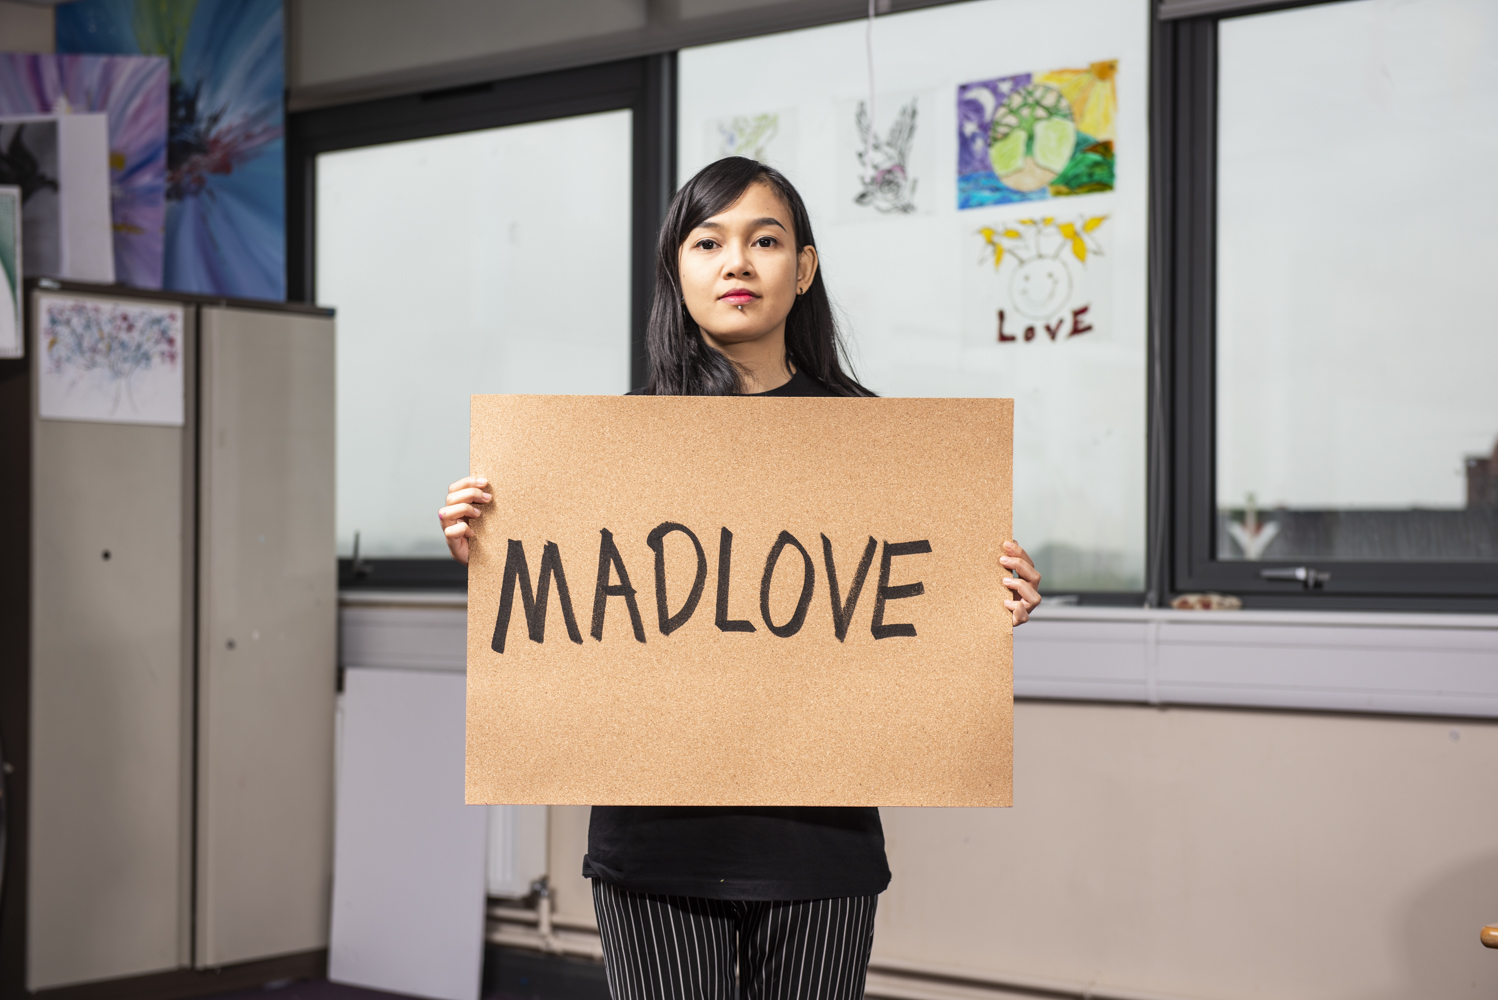 Madlove poster held by Hana Madness